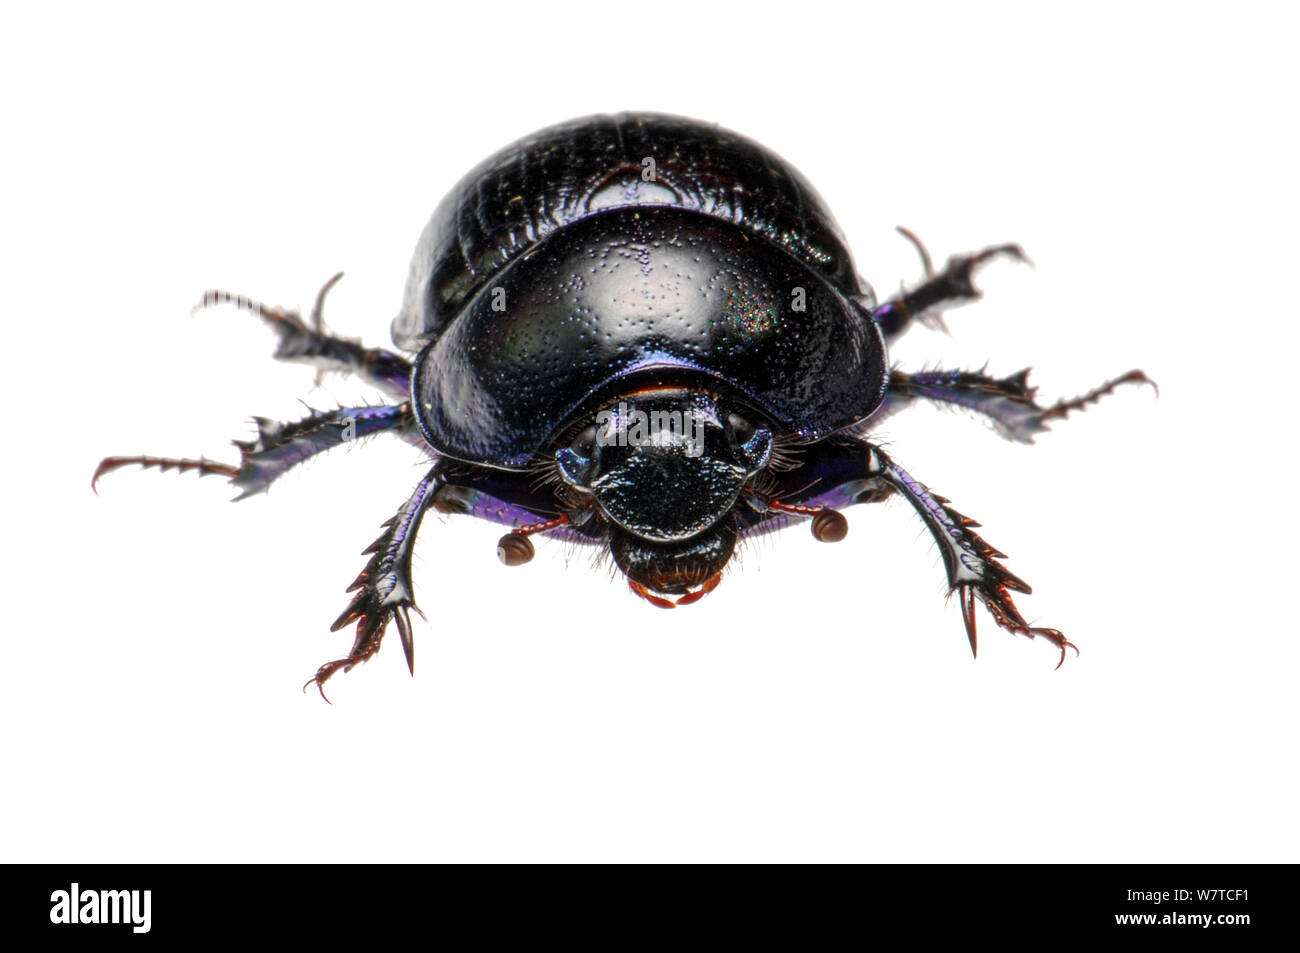 Forest Dung Beetle (Anoplotrupes stercorosus), Slovenia, Europe, June Meetyourneighbours.net project Stock Photo